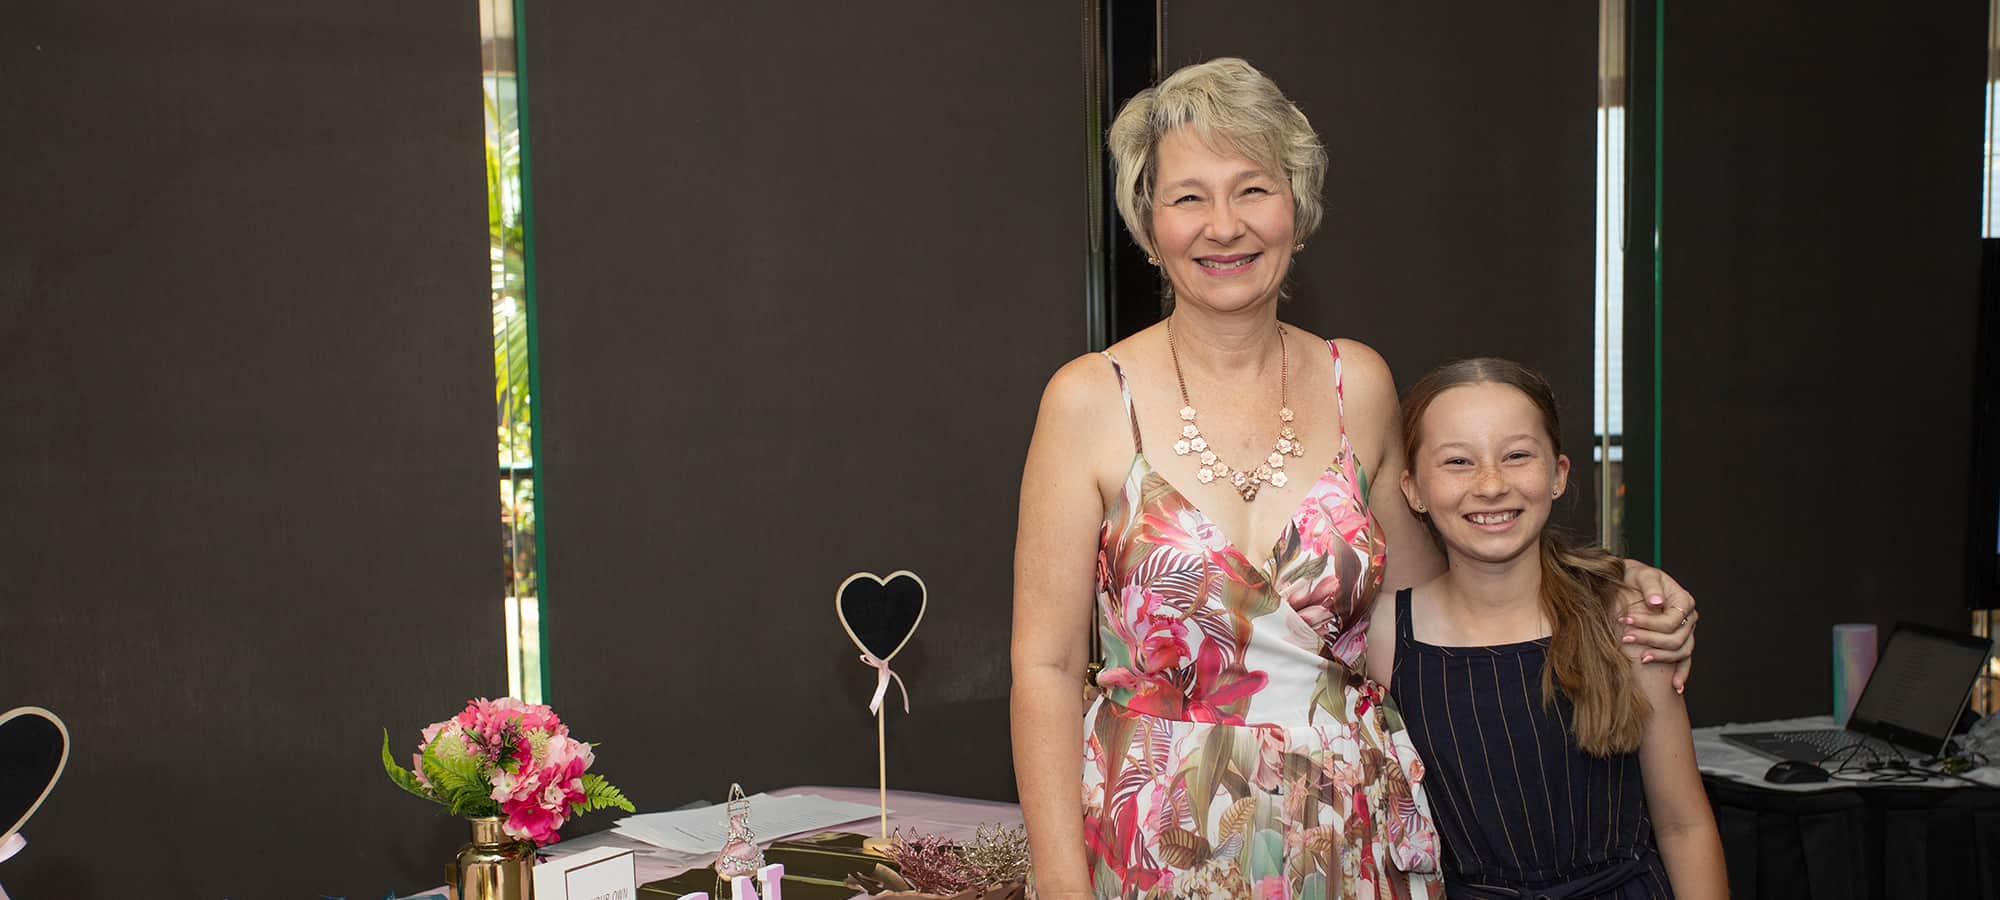 Sensational Girls Network – The Townsville Retreat for Mothers and Daughters